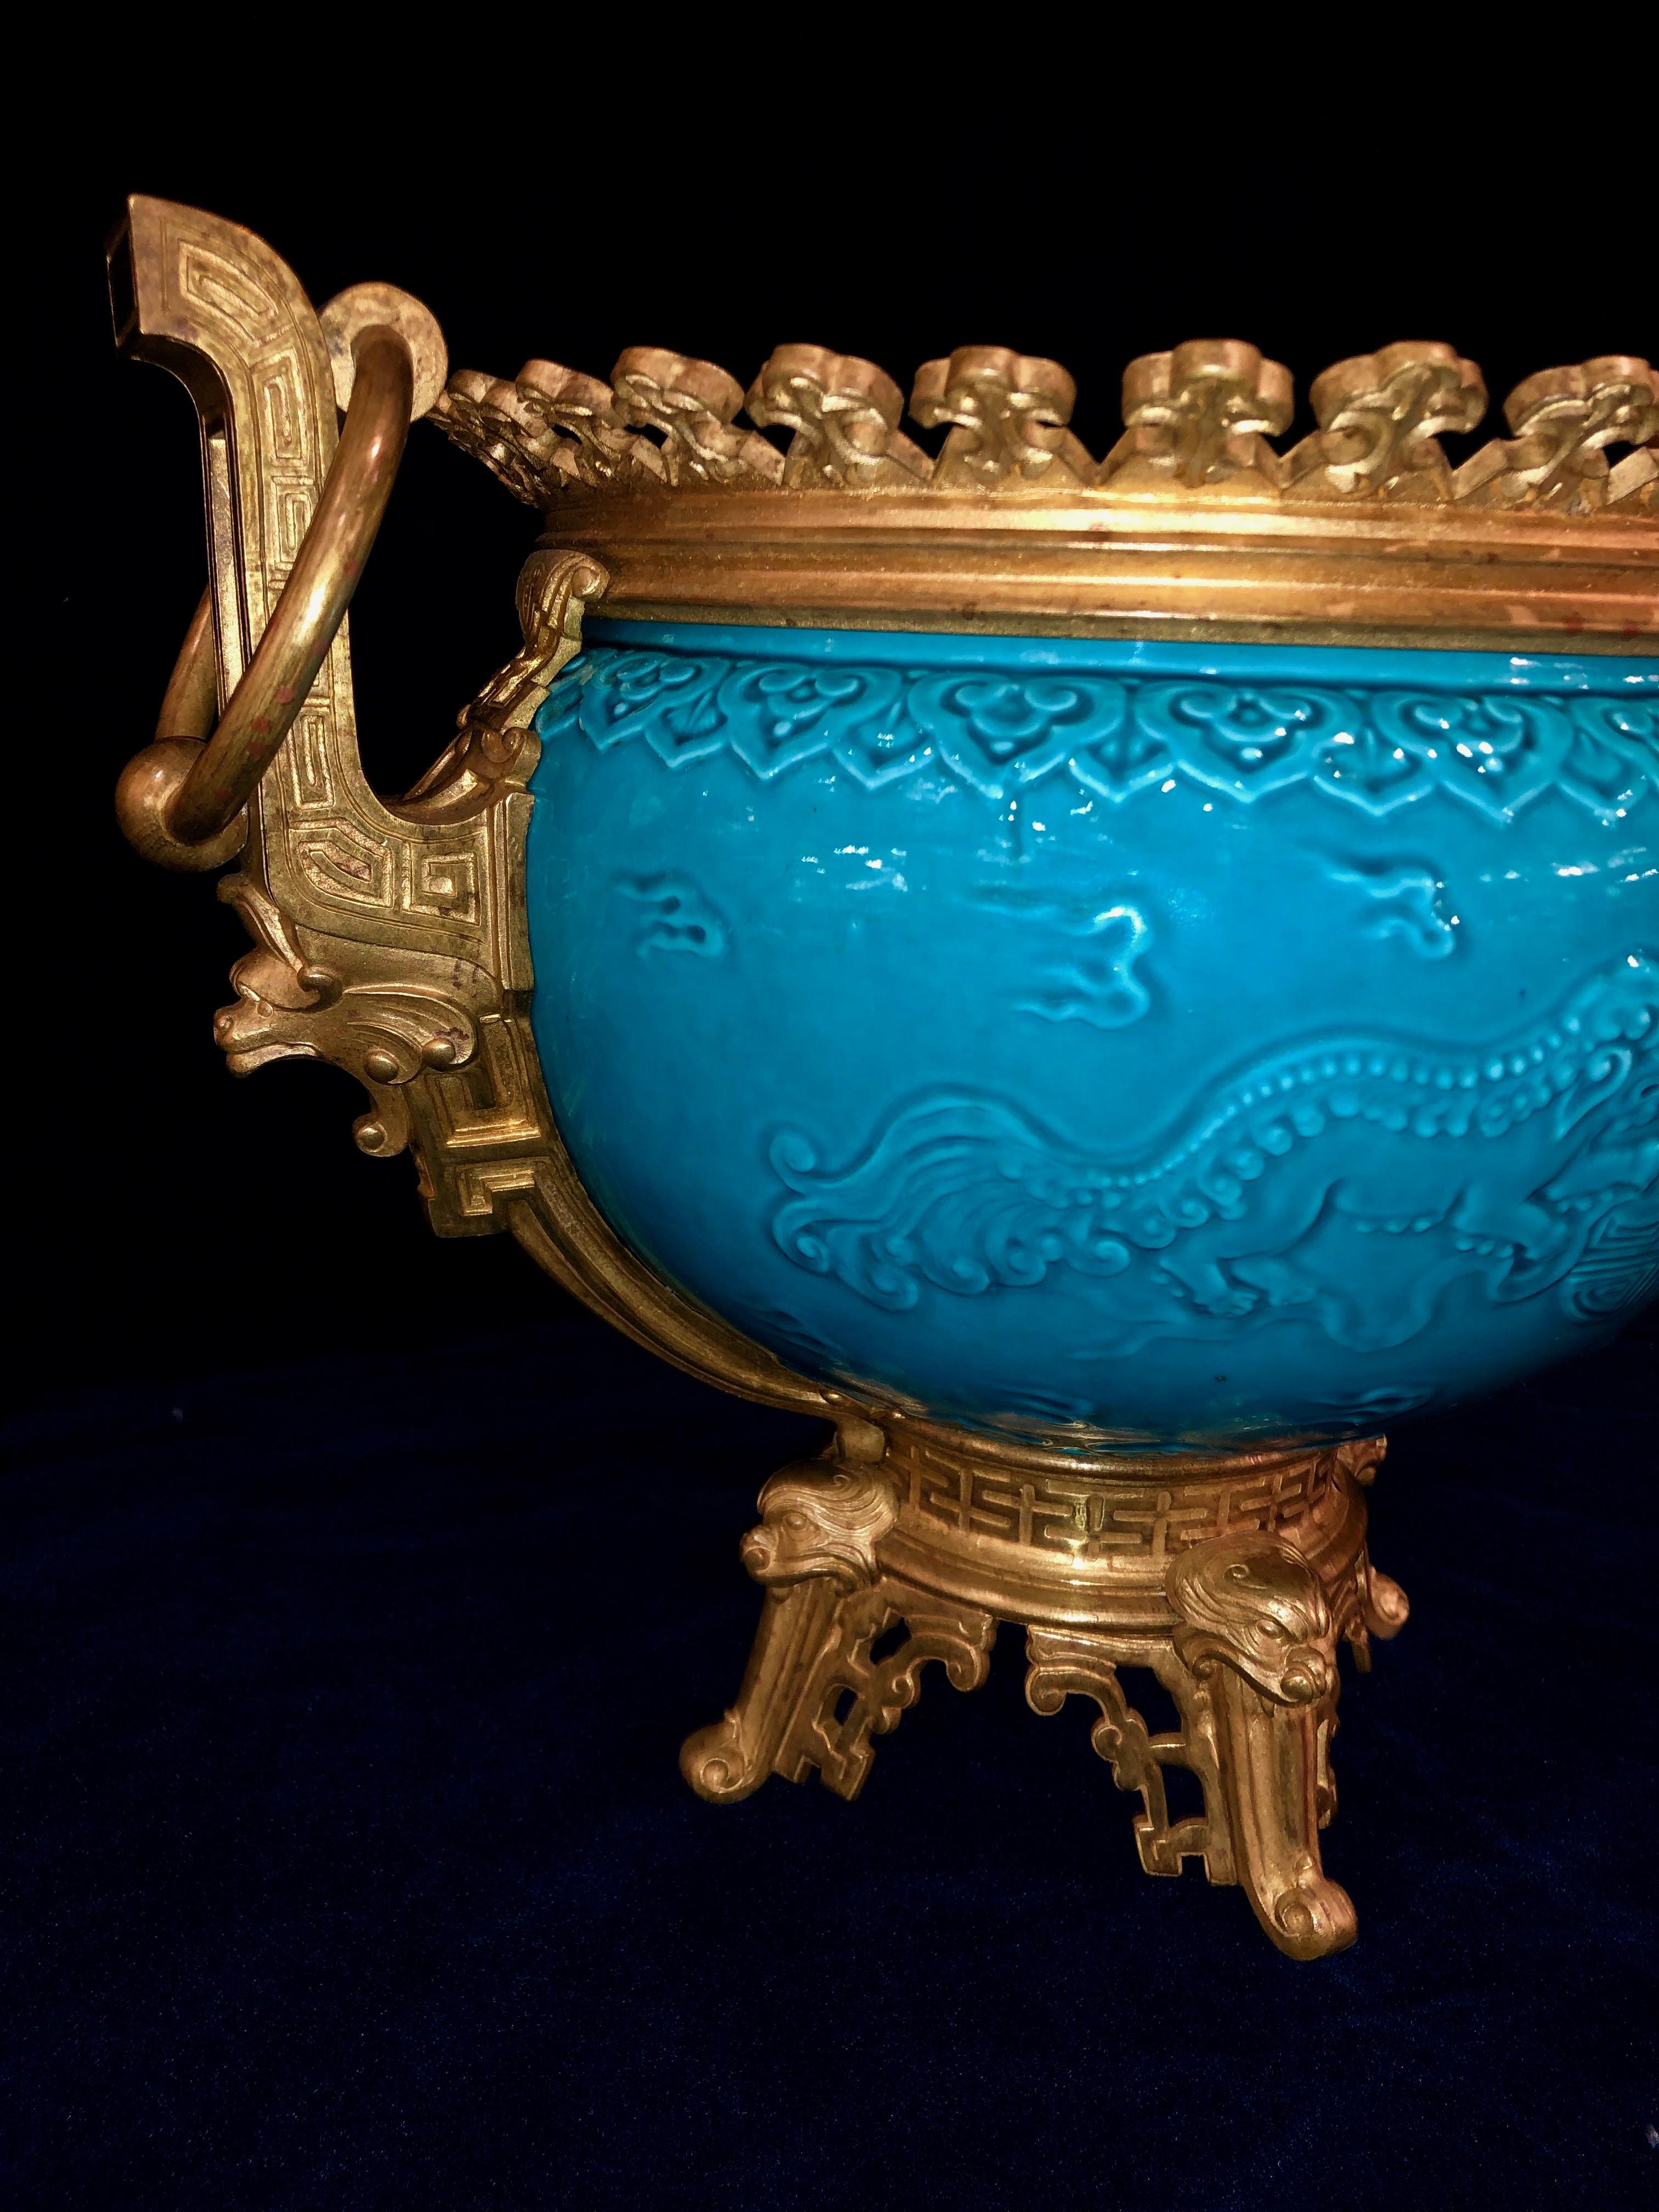 A marvelous French chinoiserie style earthenware dore bronze mounted turquoise blue ground planter or jardinière, attributed to Théodore Deck. The ceramic bowl is beautifully decorated with chinoiserie inspired decor which includes ruyi heads and